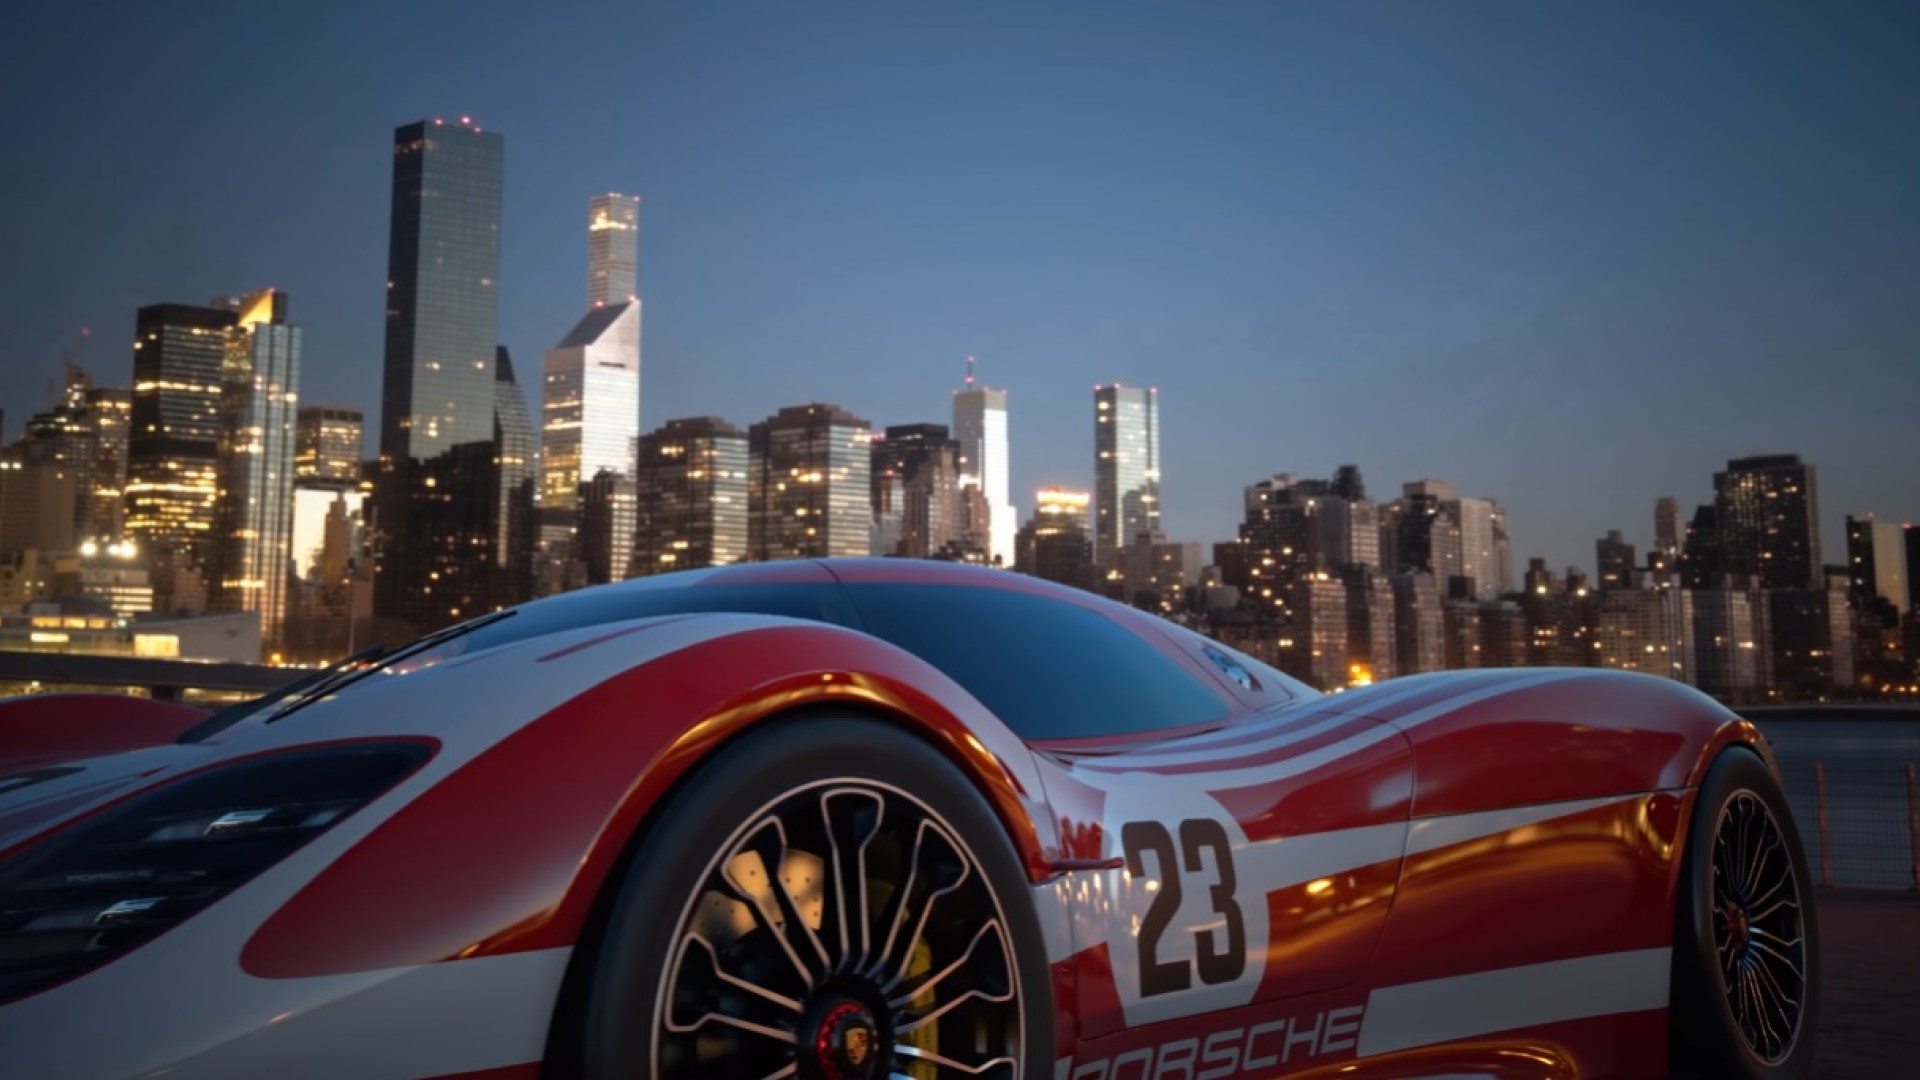 Watch: Gran Turismo 7 VR Gameplay, New Details Revealed